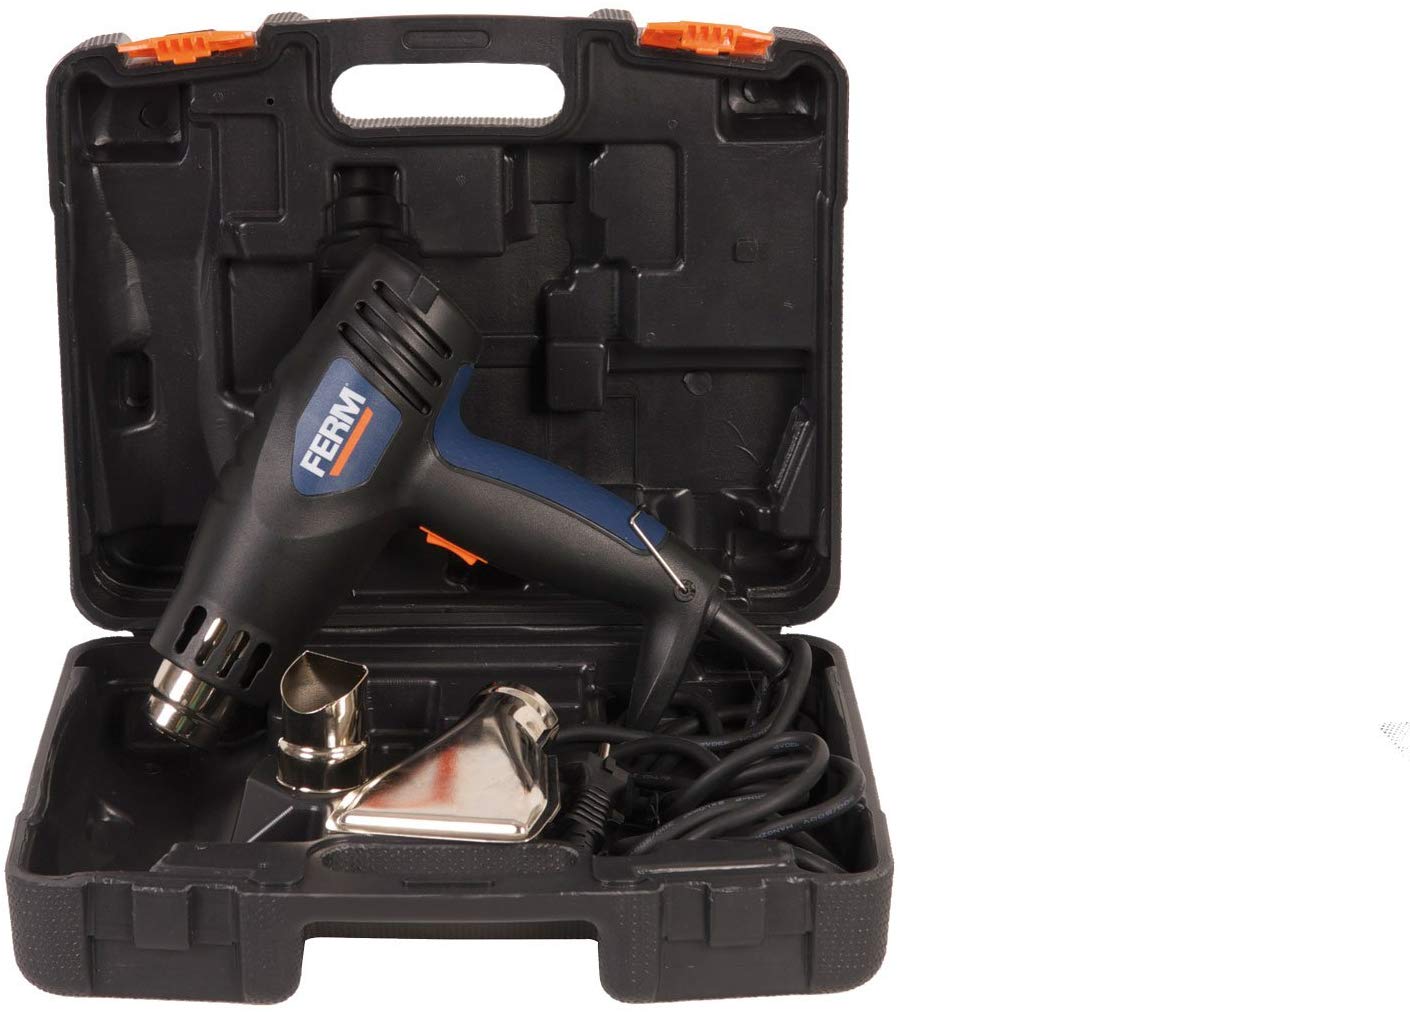 Ferm Hot Air Gun 2000W/ 240V with Nozzles and Storage Case